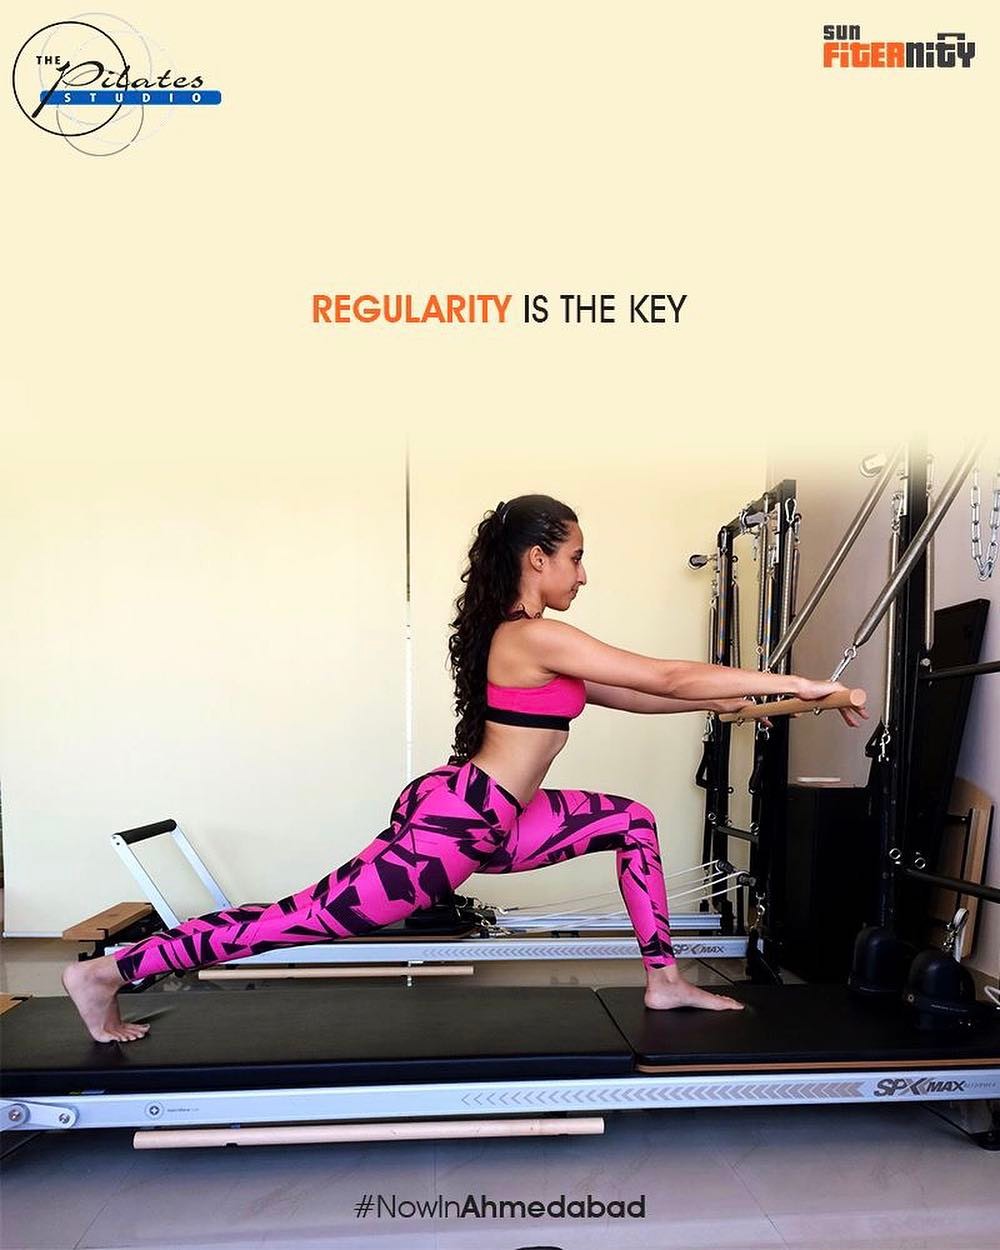 Doing Pilates with regularity will show exceptional results on your body.

#pilates #toneitup #flexibility #stretch #core #strength #regularity #workout #fun #thepilatesstudio #nowinahmedabad